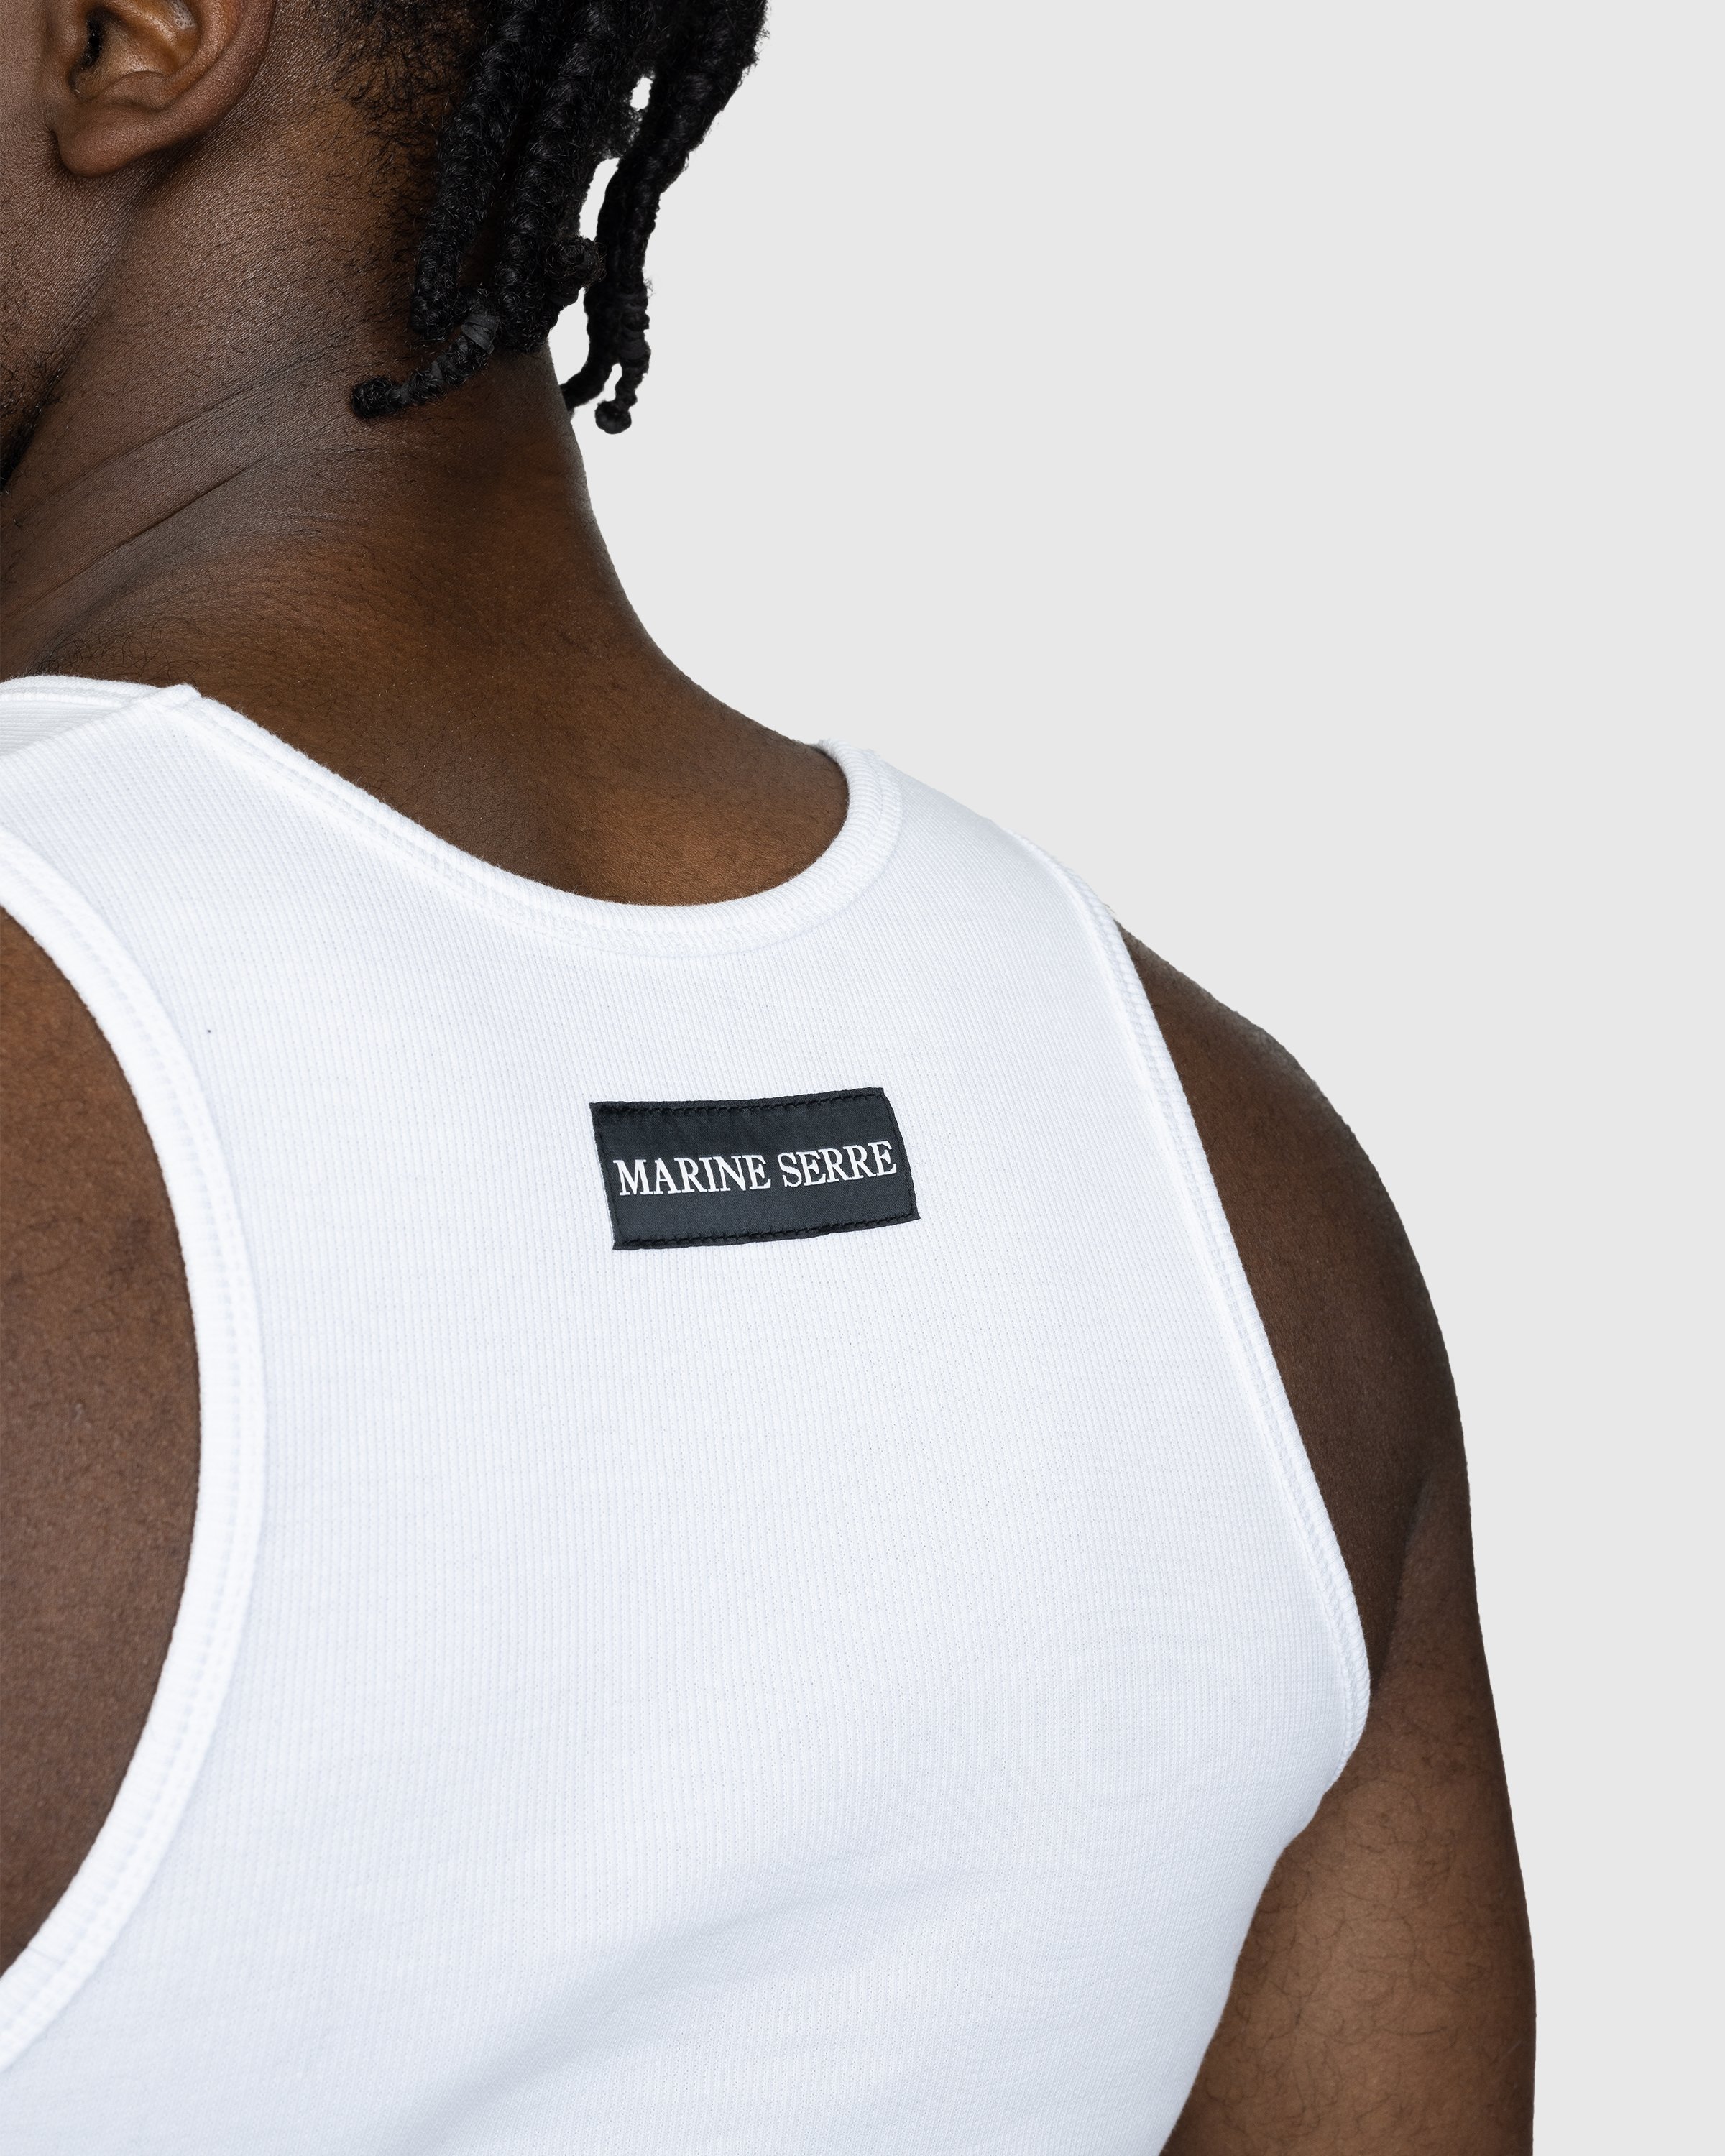 Marine Serre - Organic Cotton Fitted Tank Top White - Clothing - White - Image 4